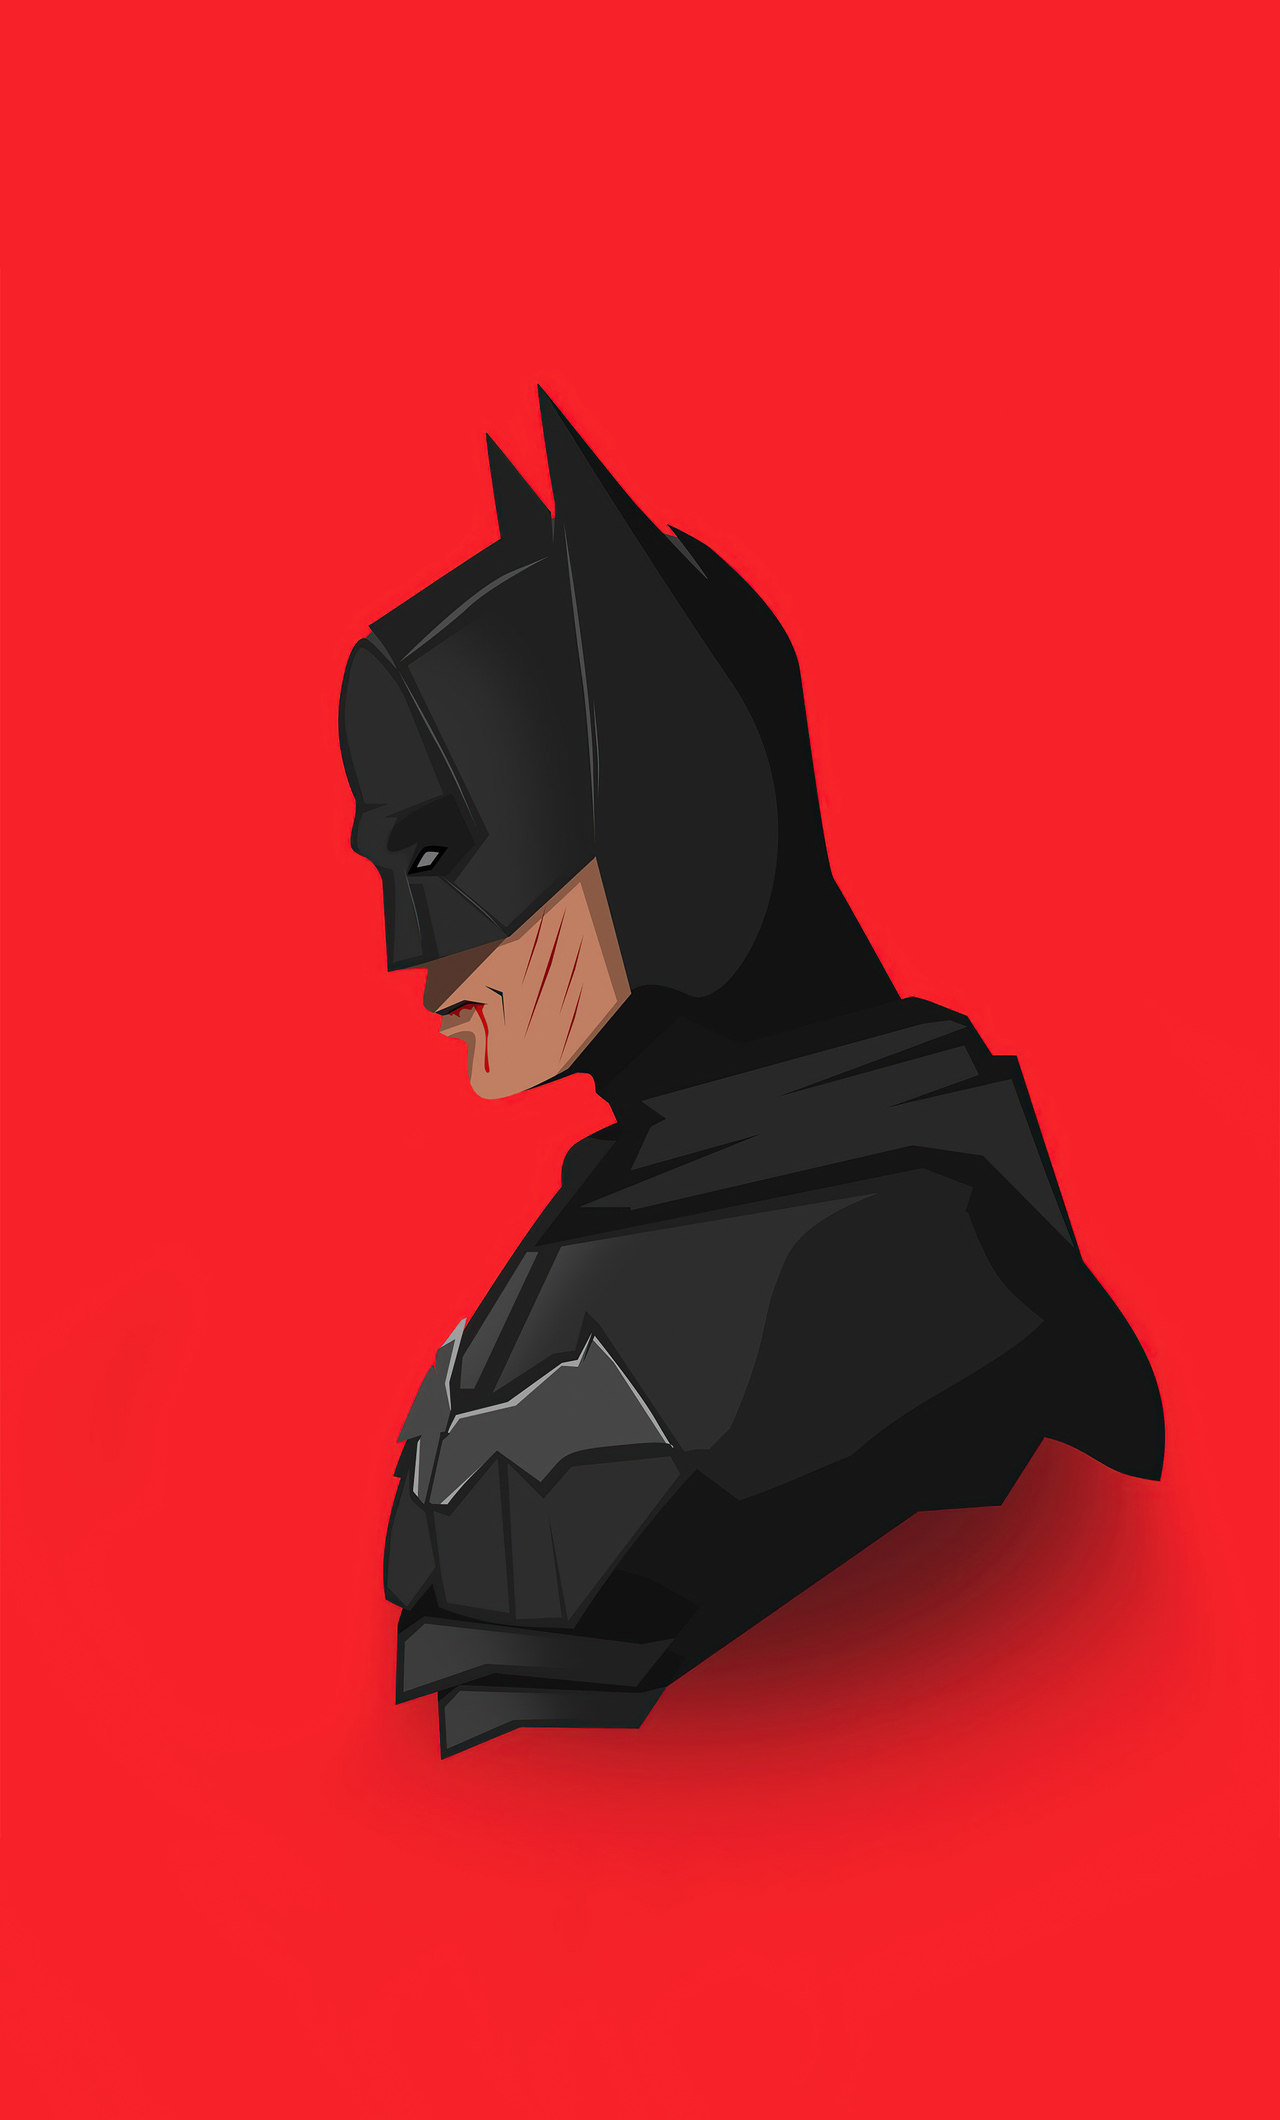 X the batman k minimalism iphone hd k wallpapers images backgrounds photos and pictures